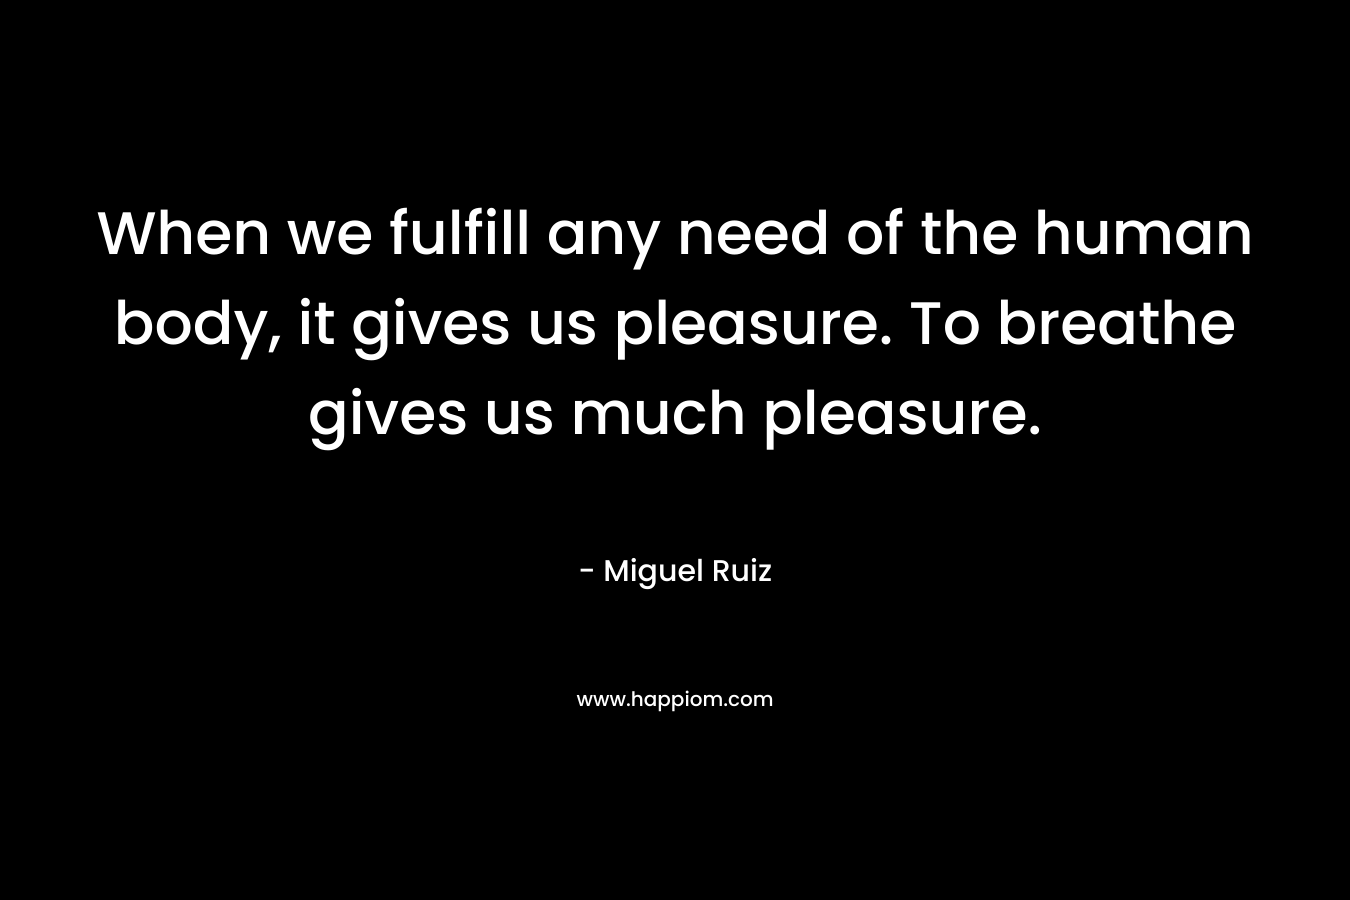 When we fulfill any need of the human body, it gives us pleasure. To breathe gives us much pleasure. – Miguel Ruiz